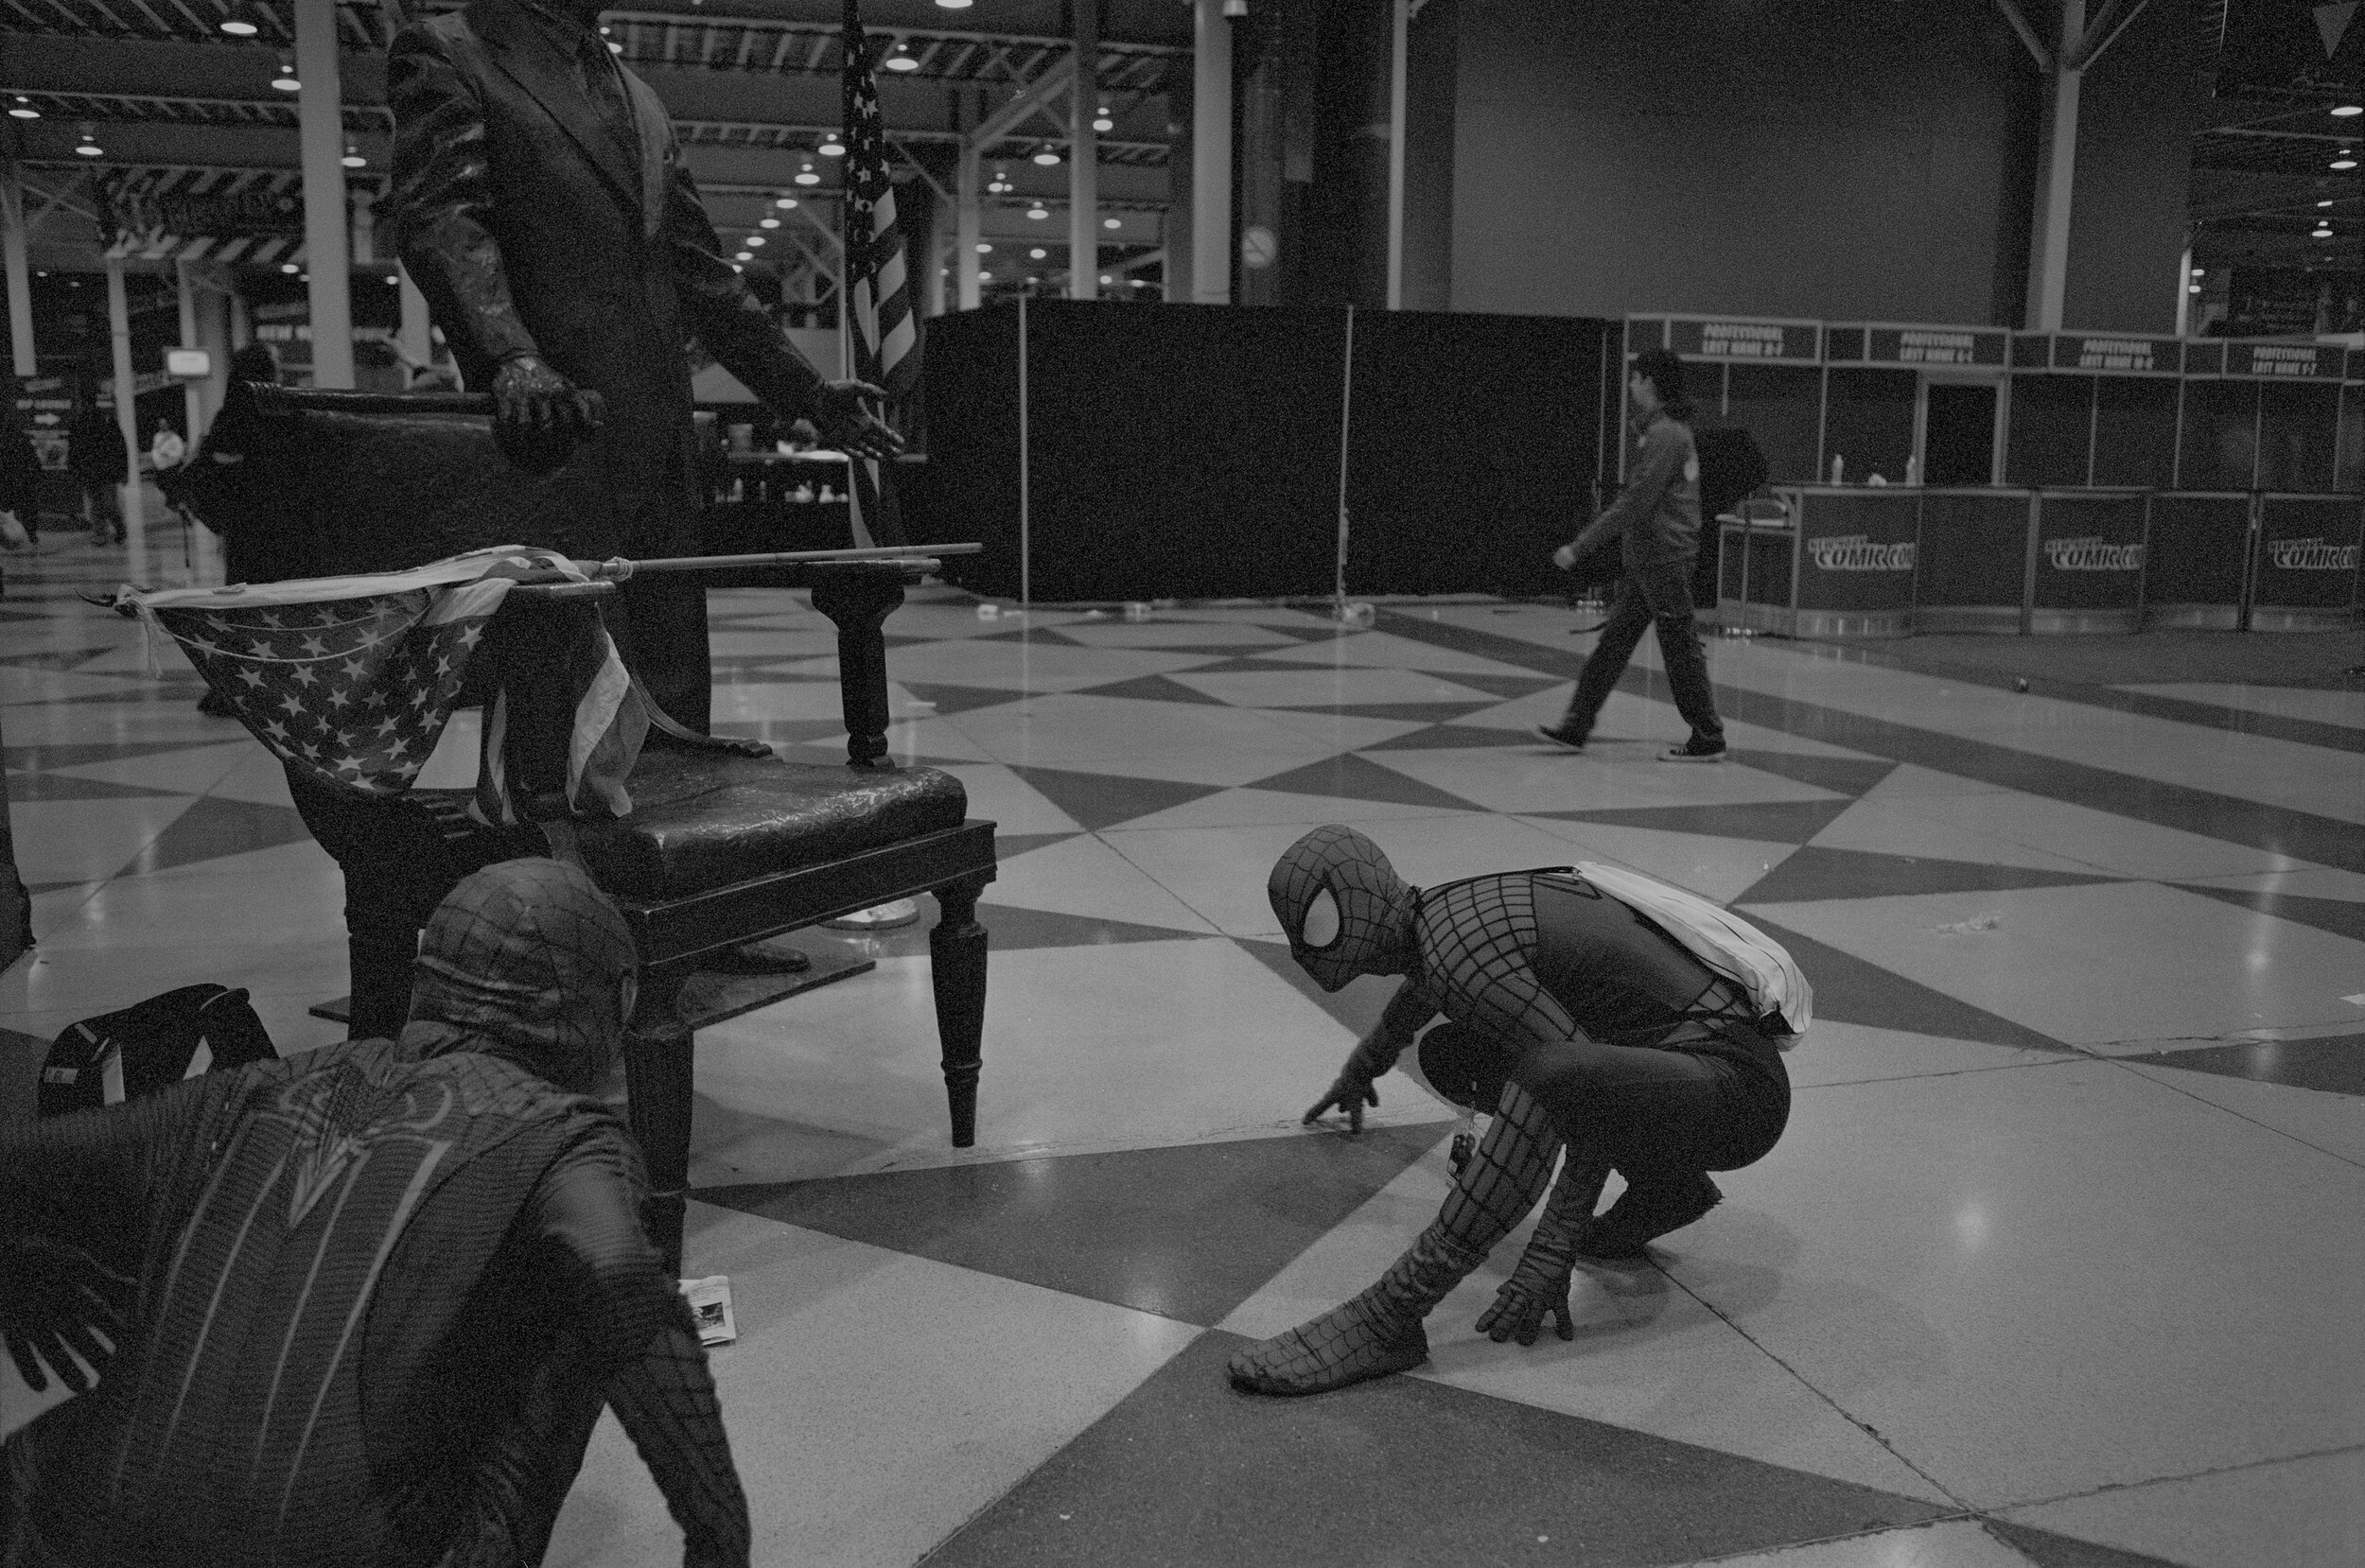  Spider-Man and Spider-Man face off in New York, NY on Oct. 13, 2012. 